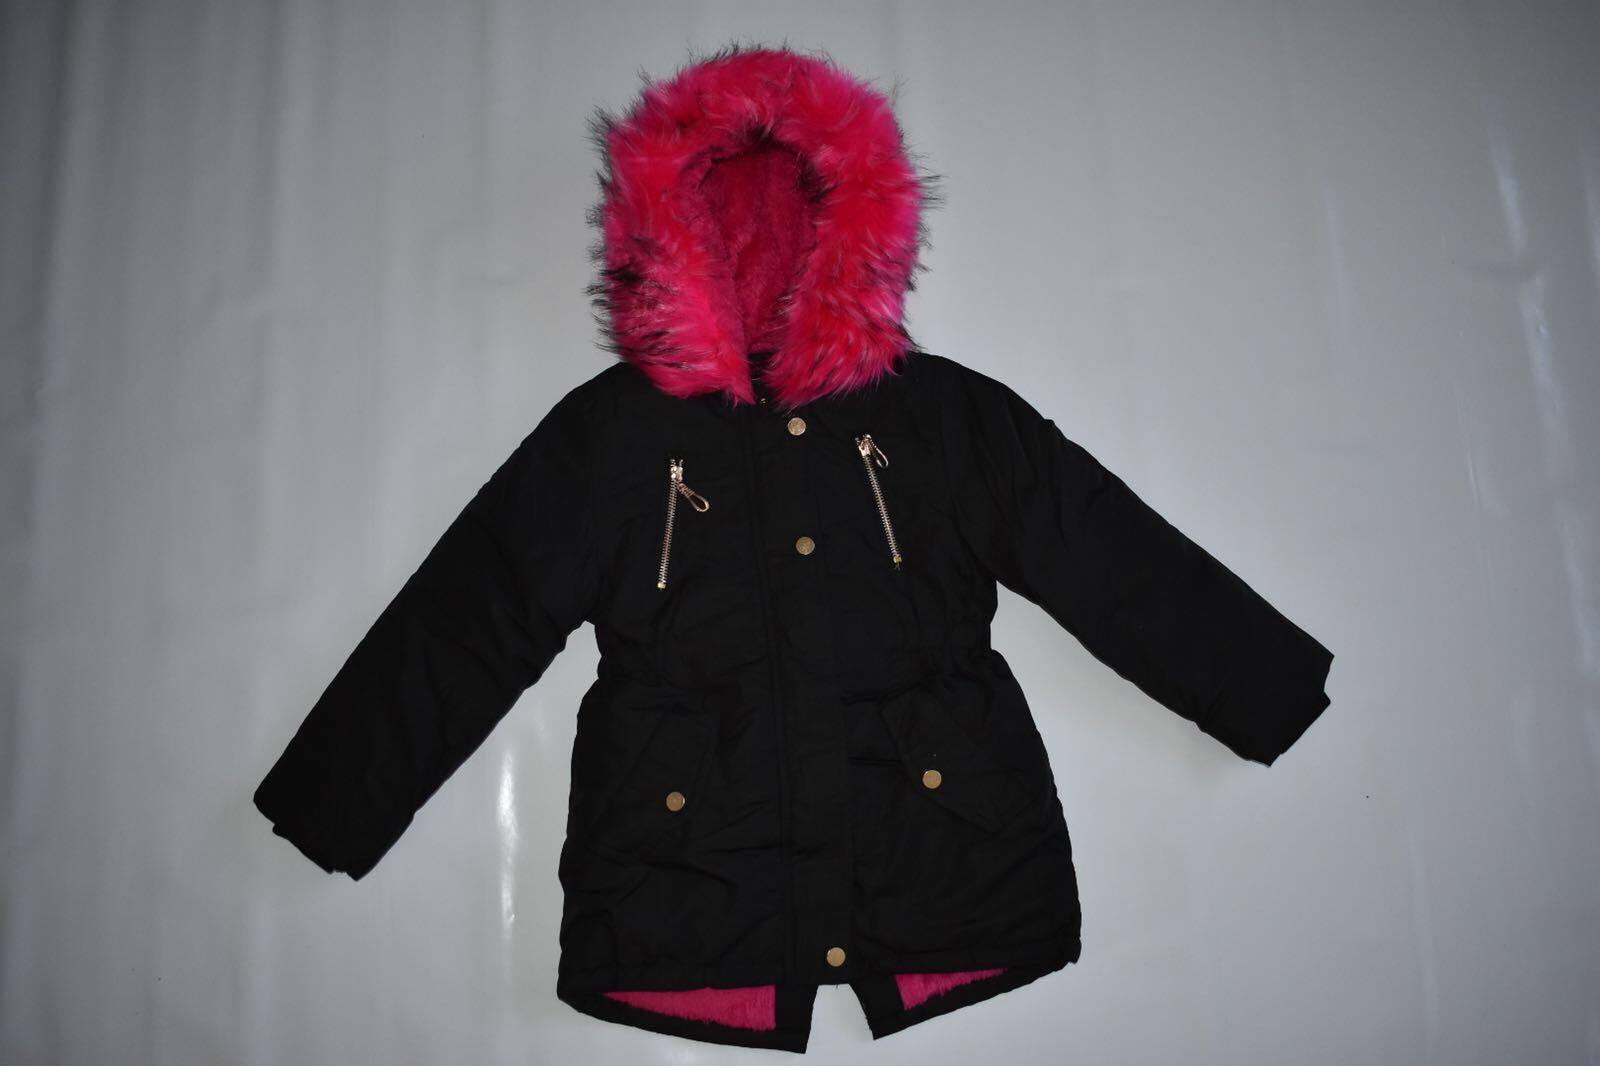 Girl's Warm Parka Style Jacket Coat with Hood 4 to 14 years Back to School  Unbranded